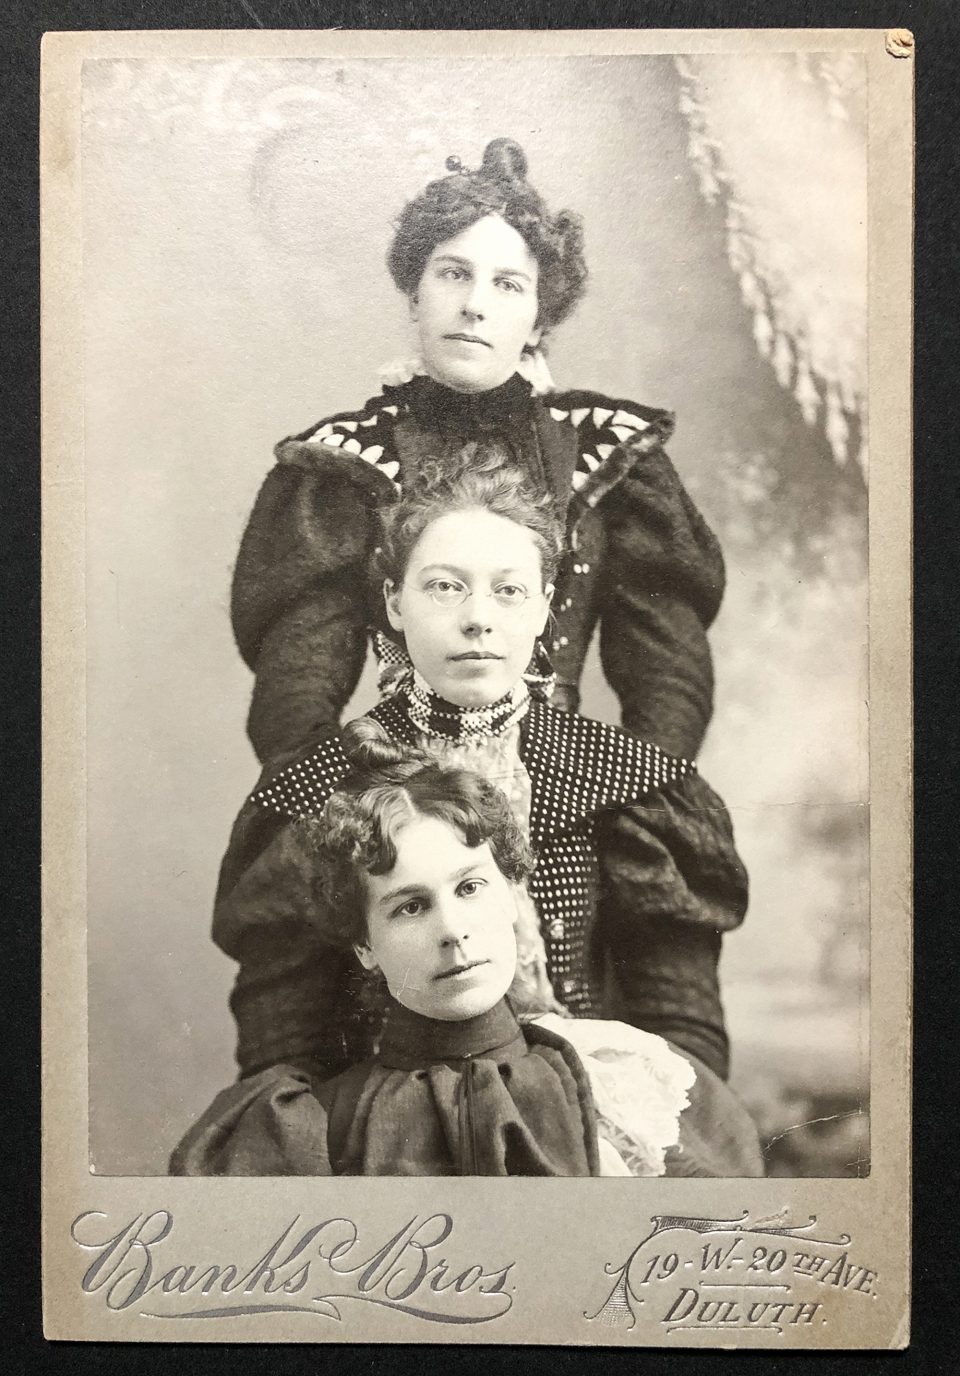 Cabinet card portrait of three young women in an unusual vertical lineup, made in the Duluth studio of the Banks Brothers. The studio name and address were stamped onto the front of the card with silver foil. The back of the card is blank. The photograph appears to be a gelatin silver print rather than an albumen print that was typically seen on cabinet cards.